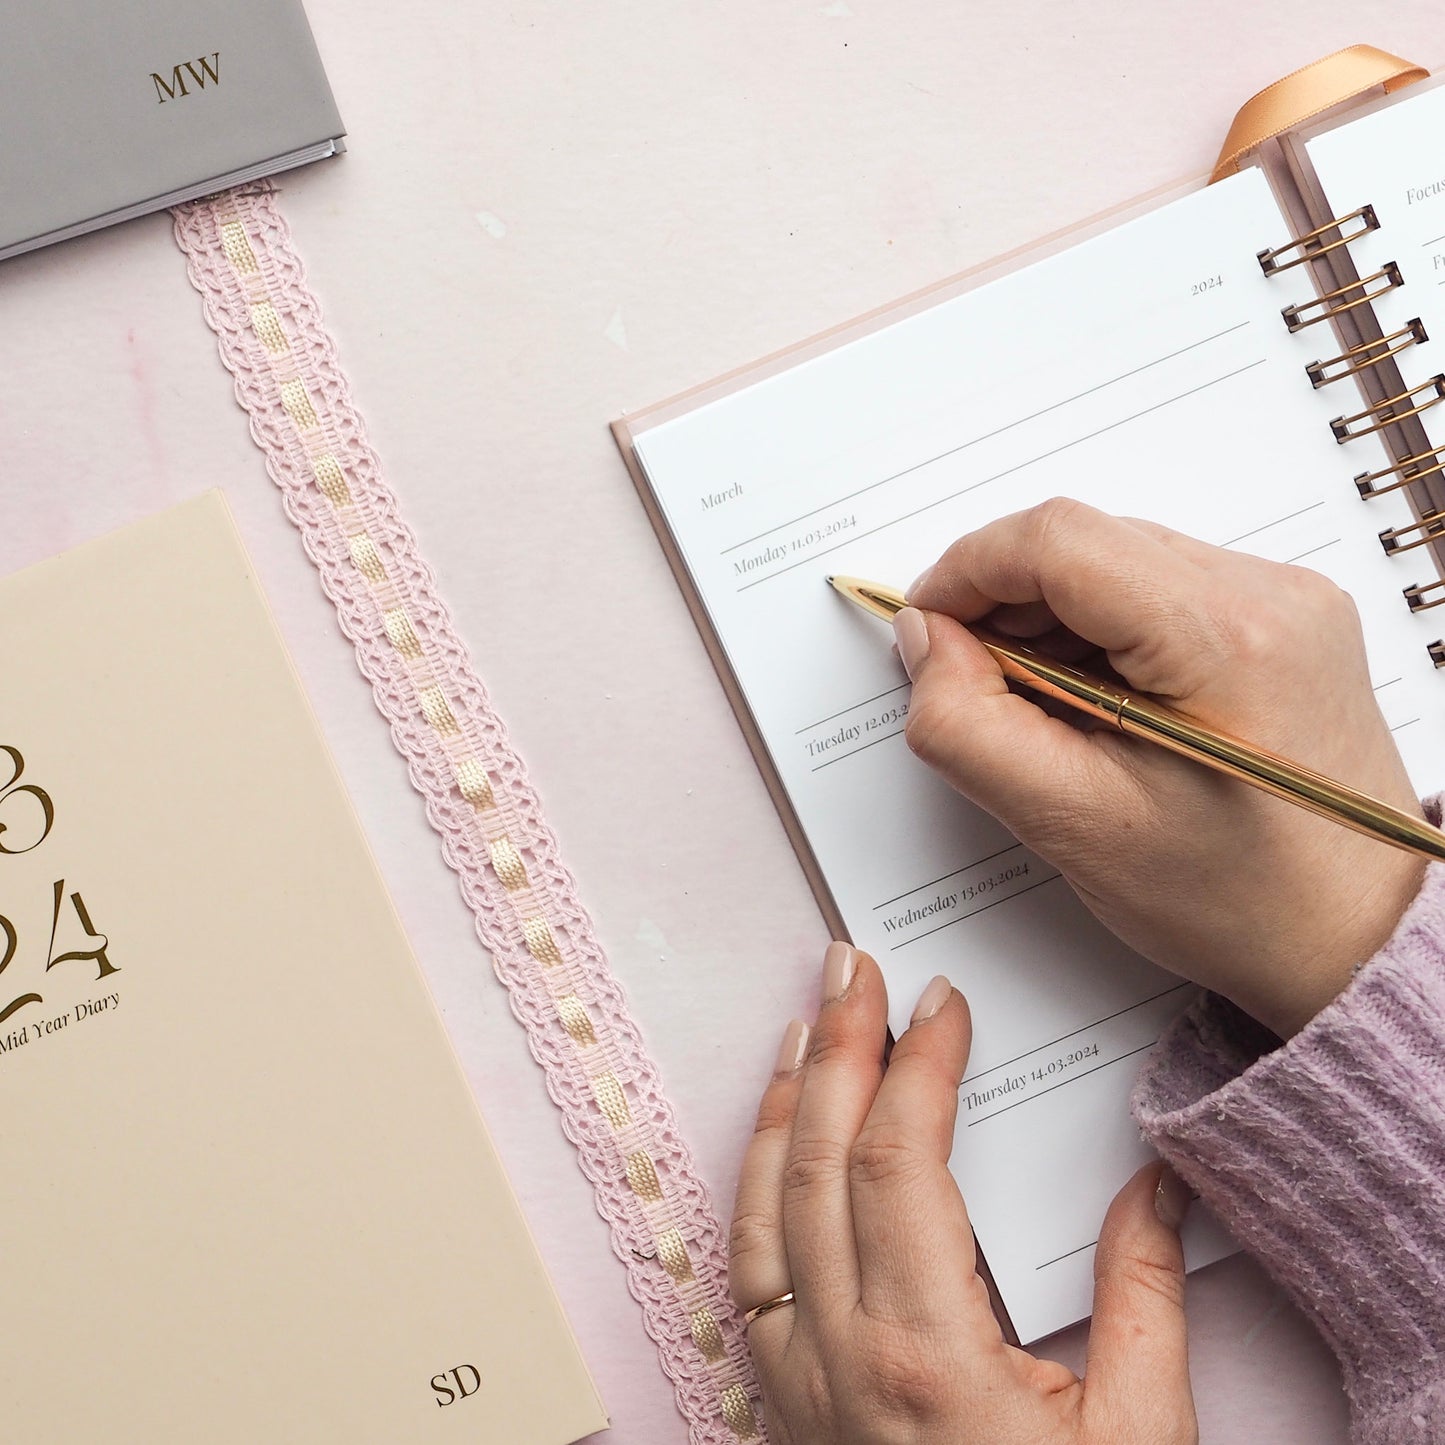 Personalised | 23/24 Mid Year Diary | Colour Me Neutrals Collections